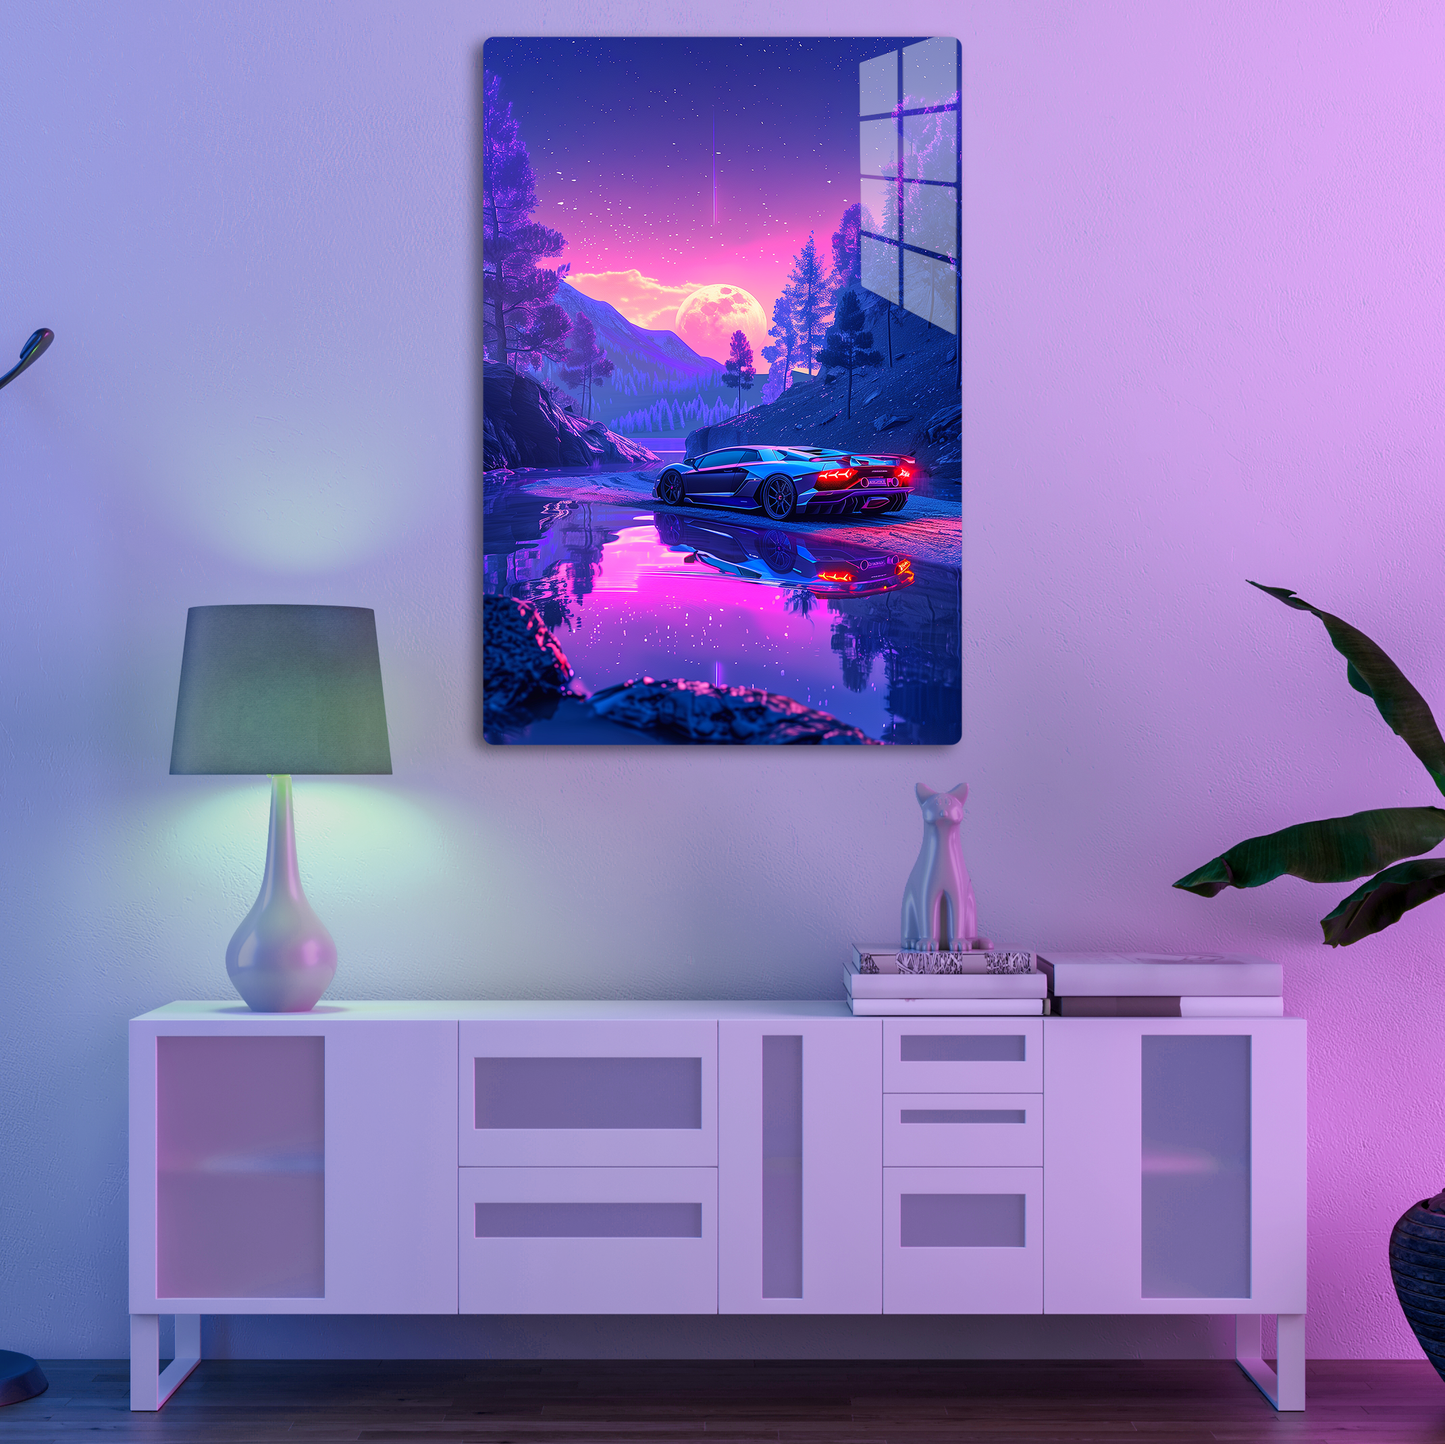 Twilight Reflections (Acrylic)Step into the universe with 'Twilight Reflections' on Acrylic from RimaGallery. Experience the cosmos in your home with vibrant, ethically crafted art. Free shippingRimaGallery